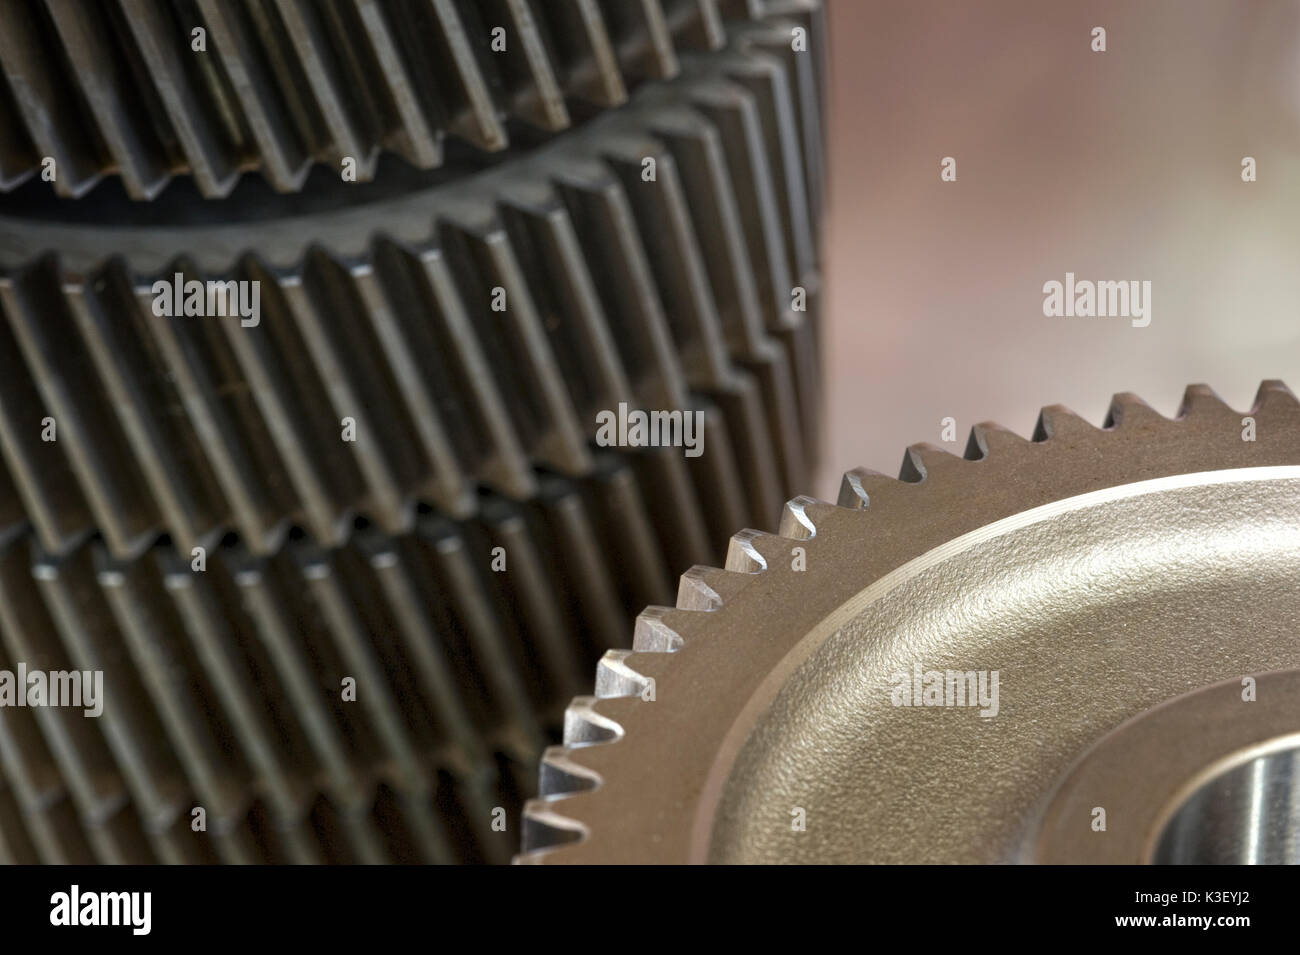 Helical gearing wheels used in manufacturing industrial gear trains for heavy-duty elelctric motors and industrial applications. Stock Photo